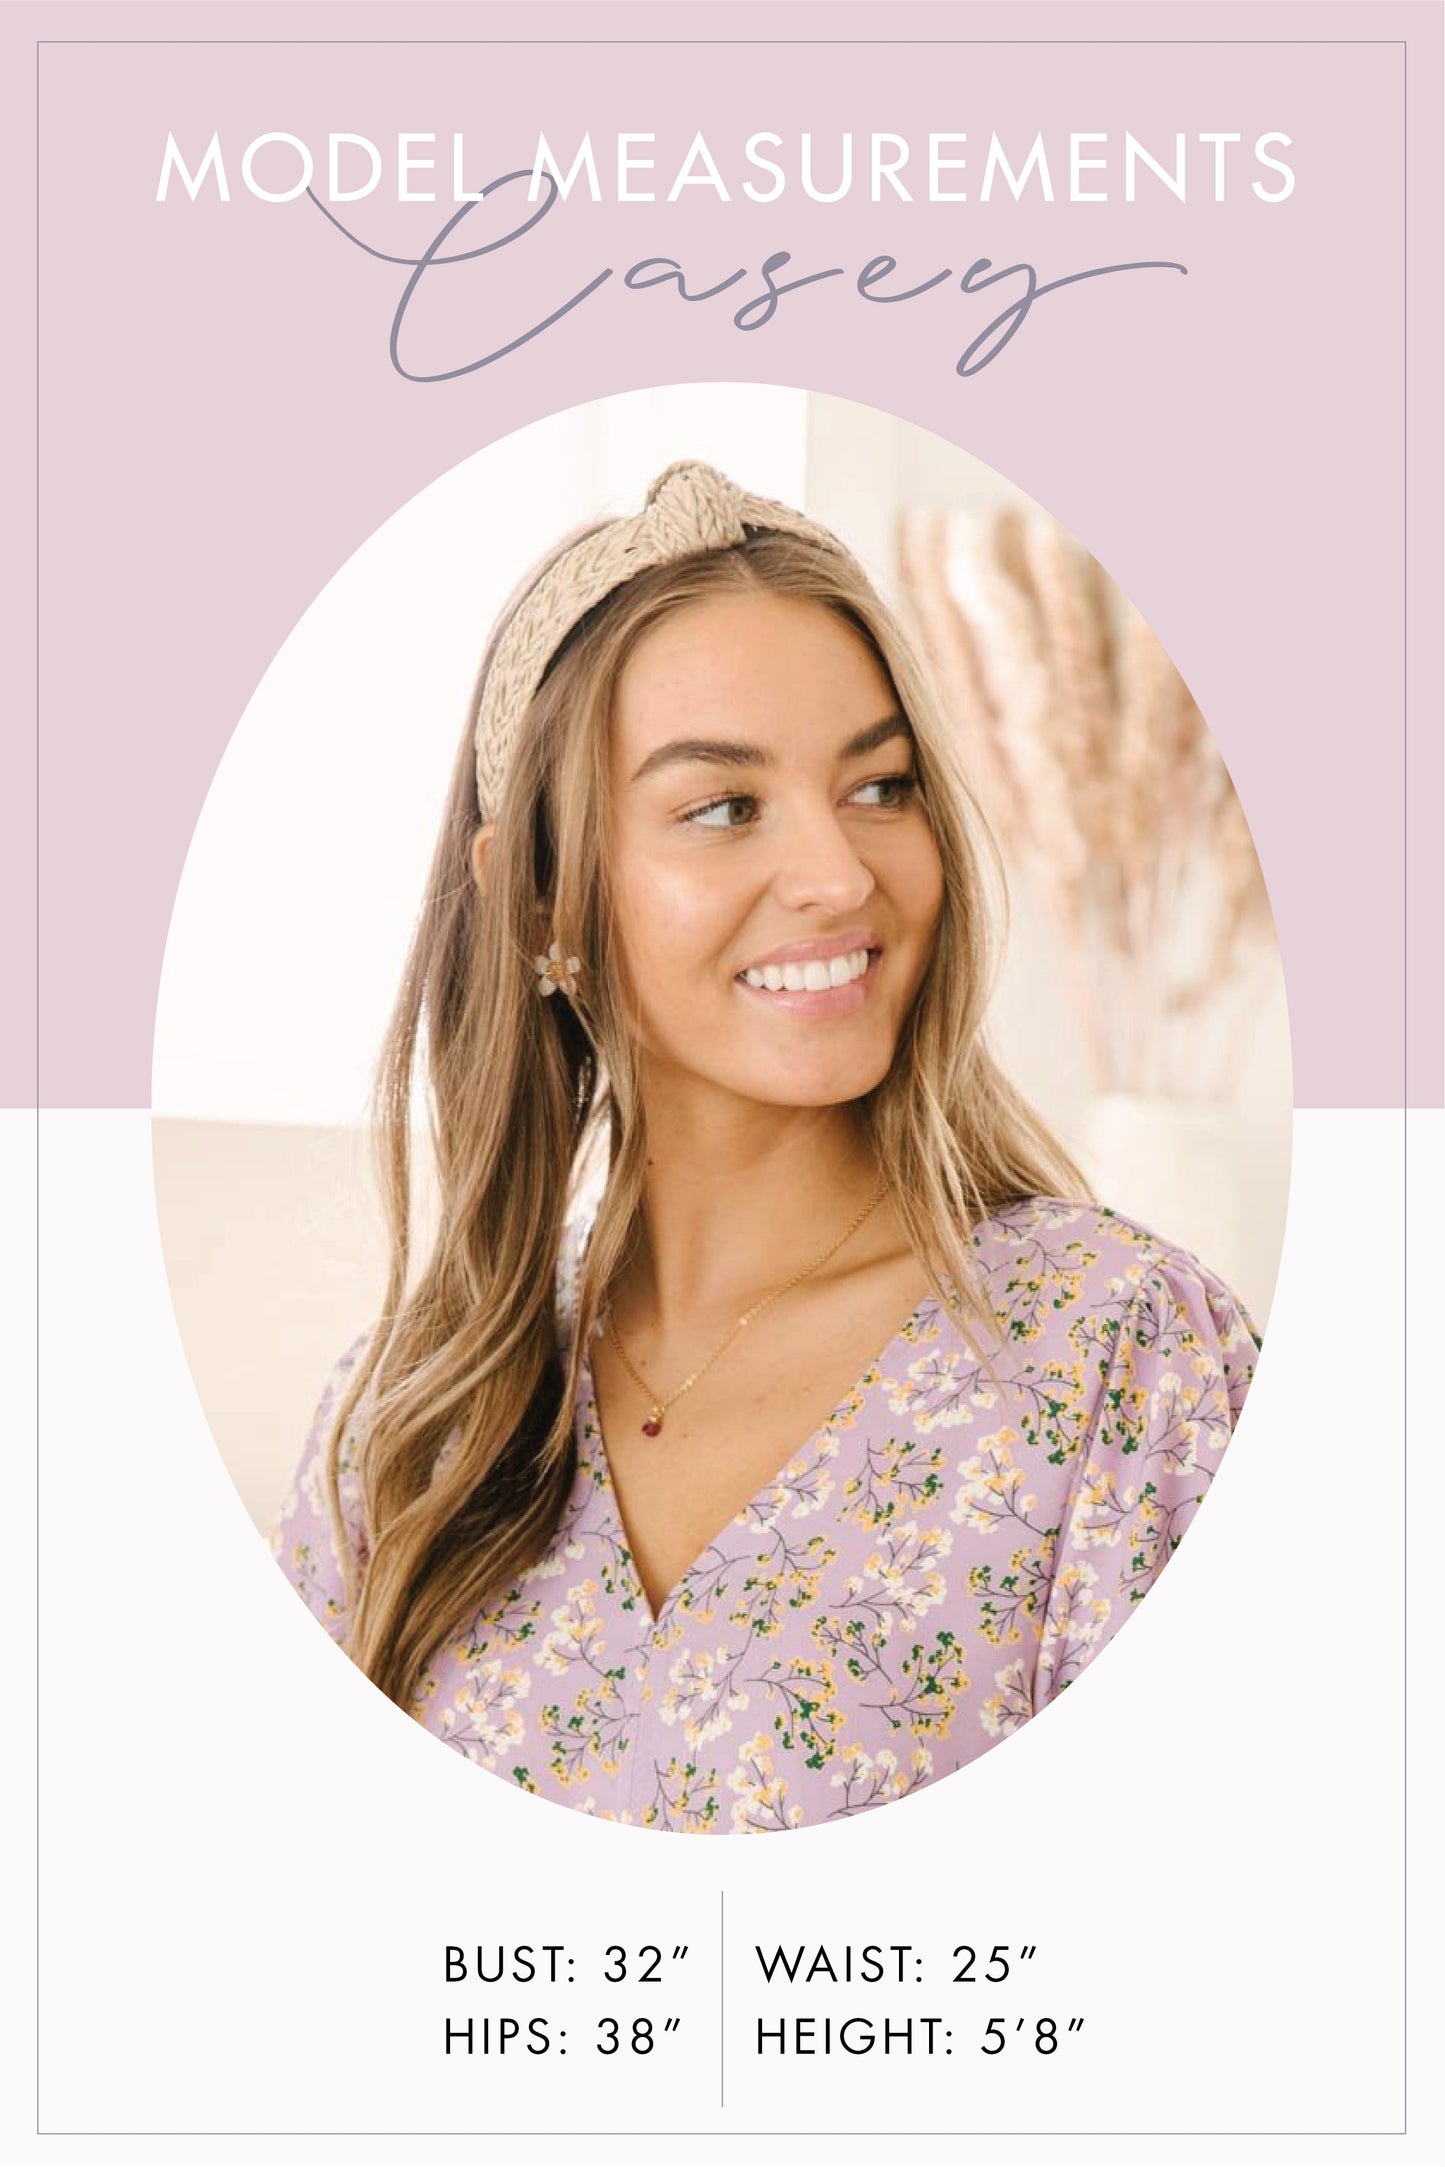 Dreaming Of Swiss Dots Top in Mauve